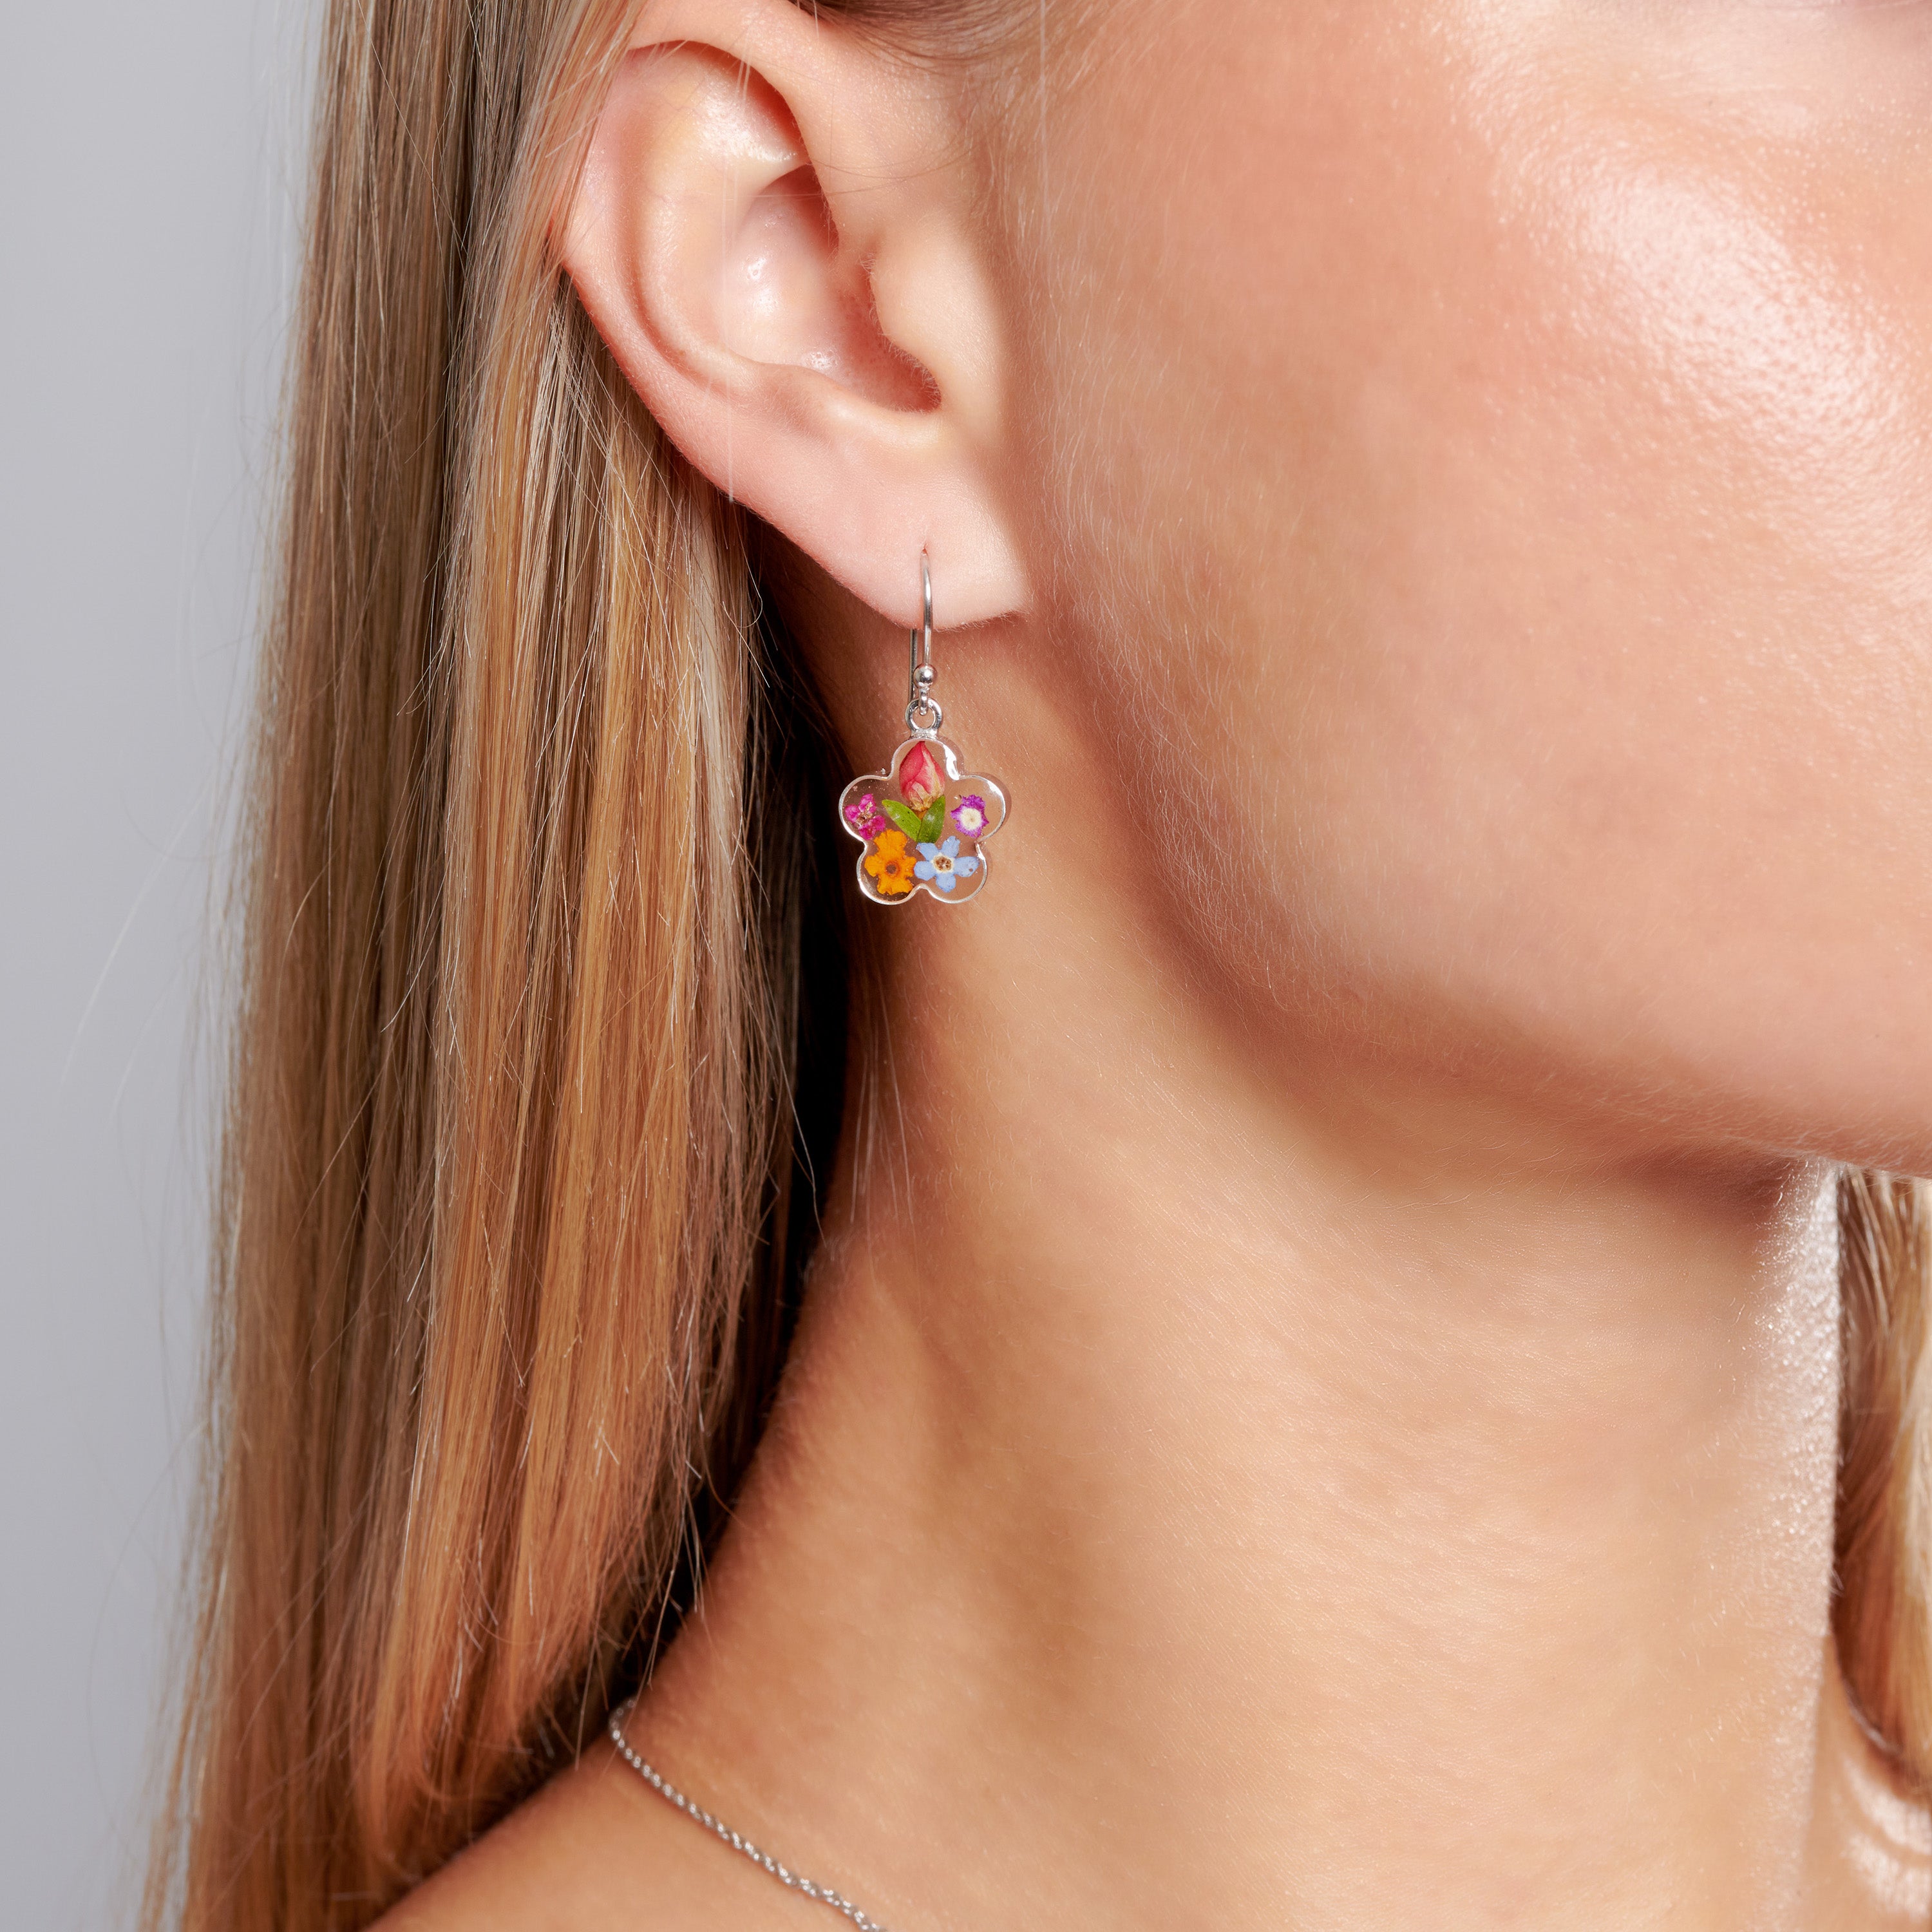 Dira Earrings with Multi Colored Flowers